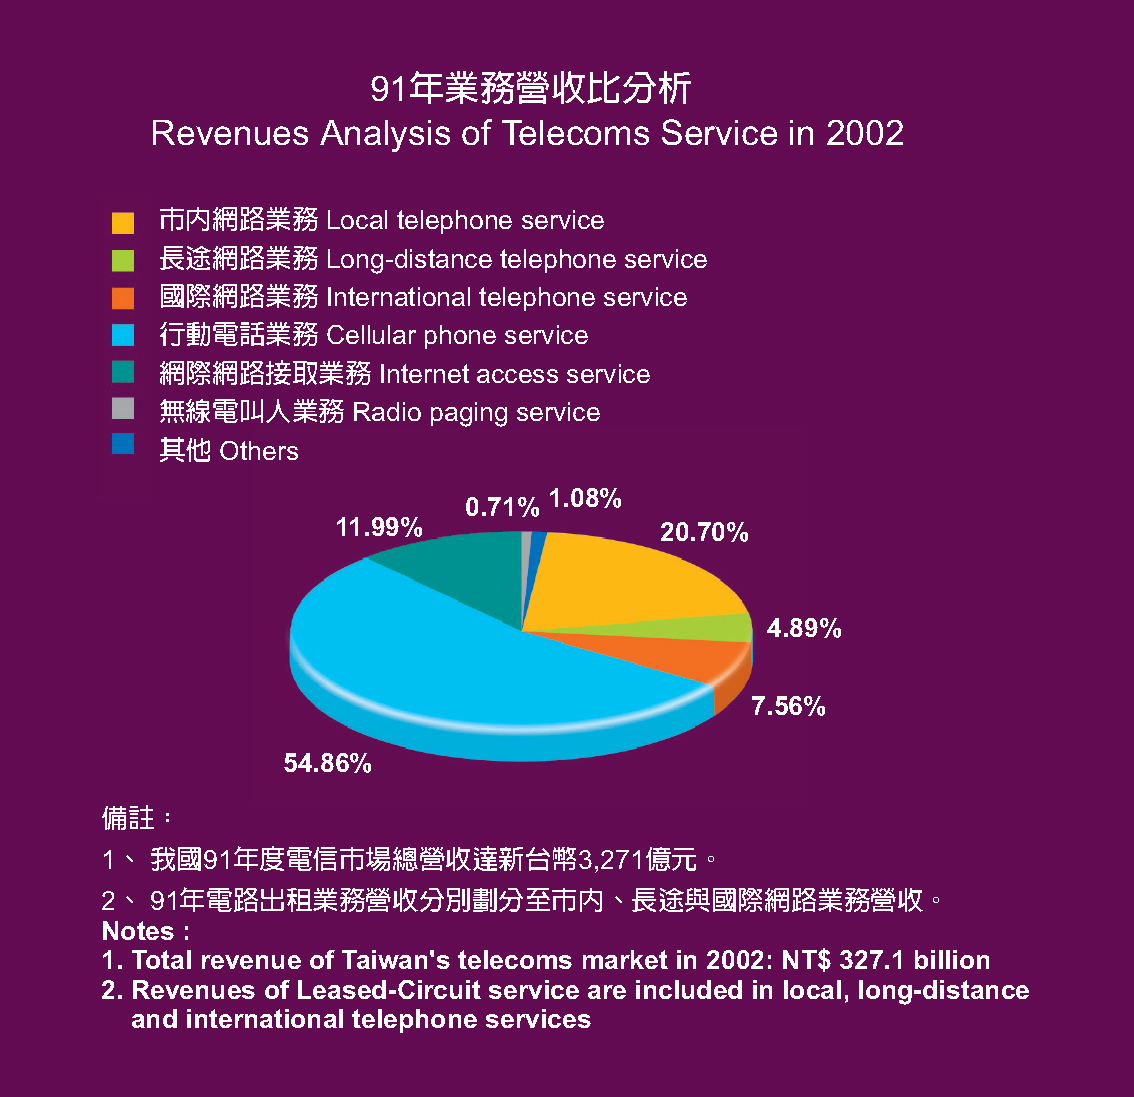 Revenues Analysis of Telecoms Service in 2002